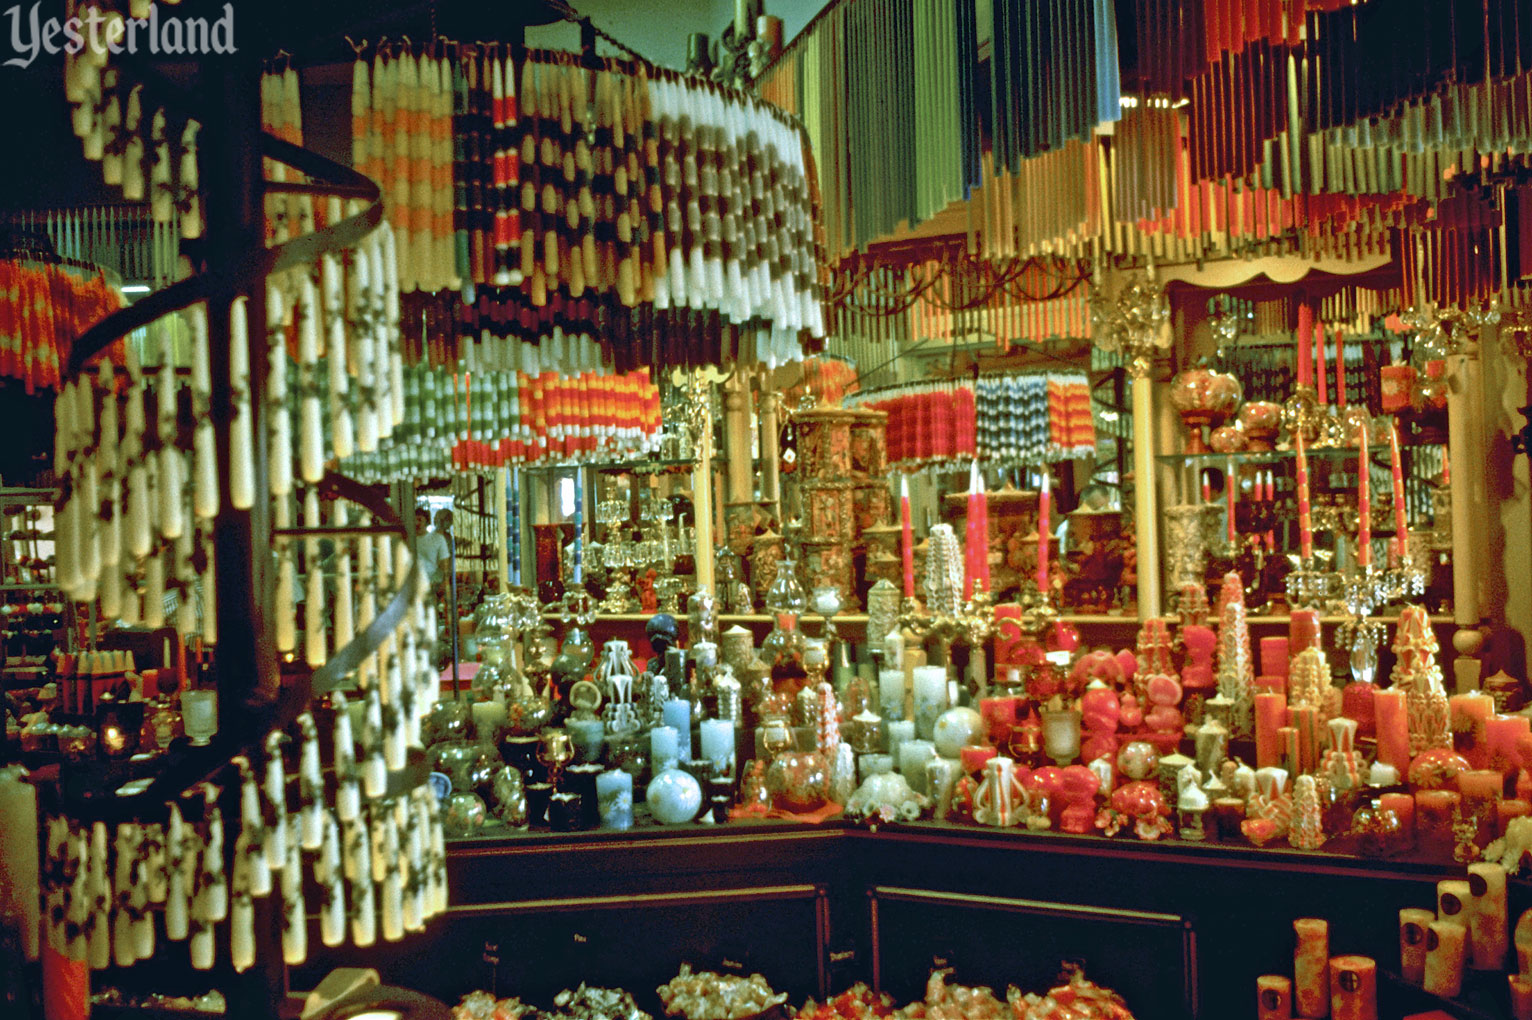 Yesterland Candle Shop